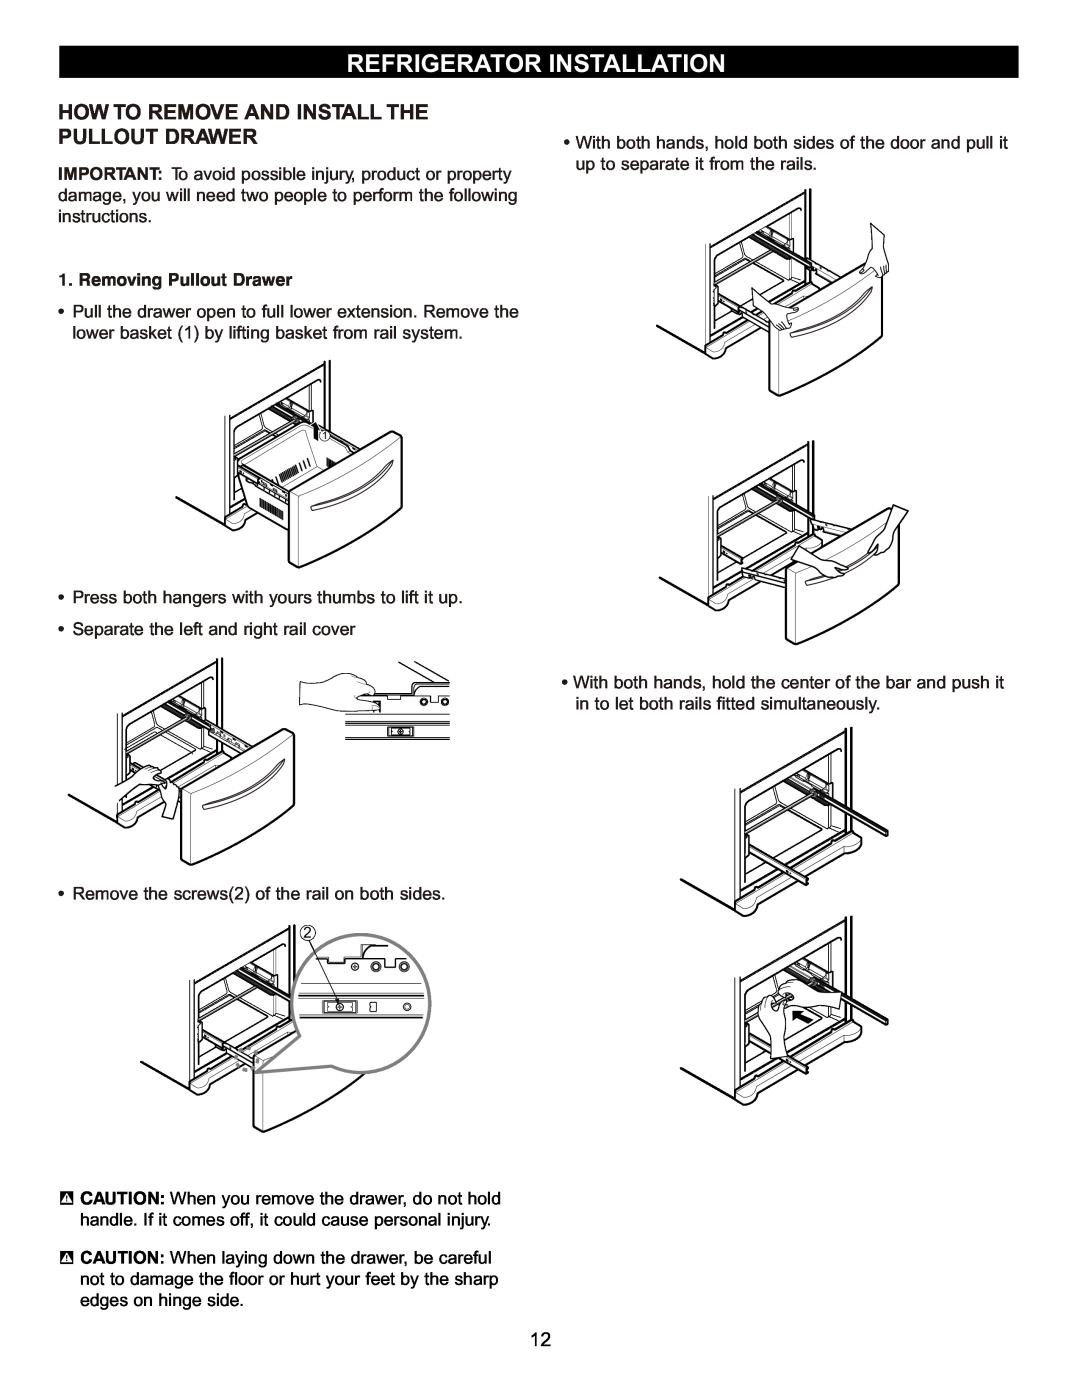 LG Electronics LFC23760 How To Remove And Install The Pullout Drawer, Refrigerator Installation, Removing Pullout Drawer 